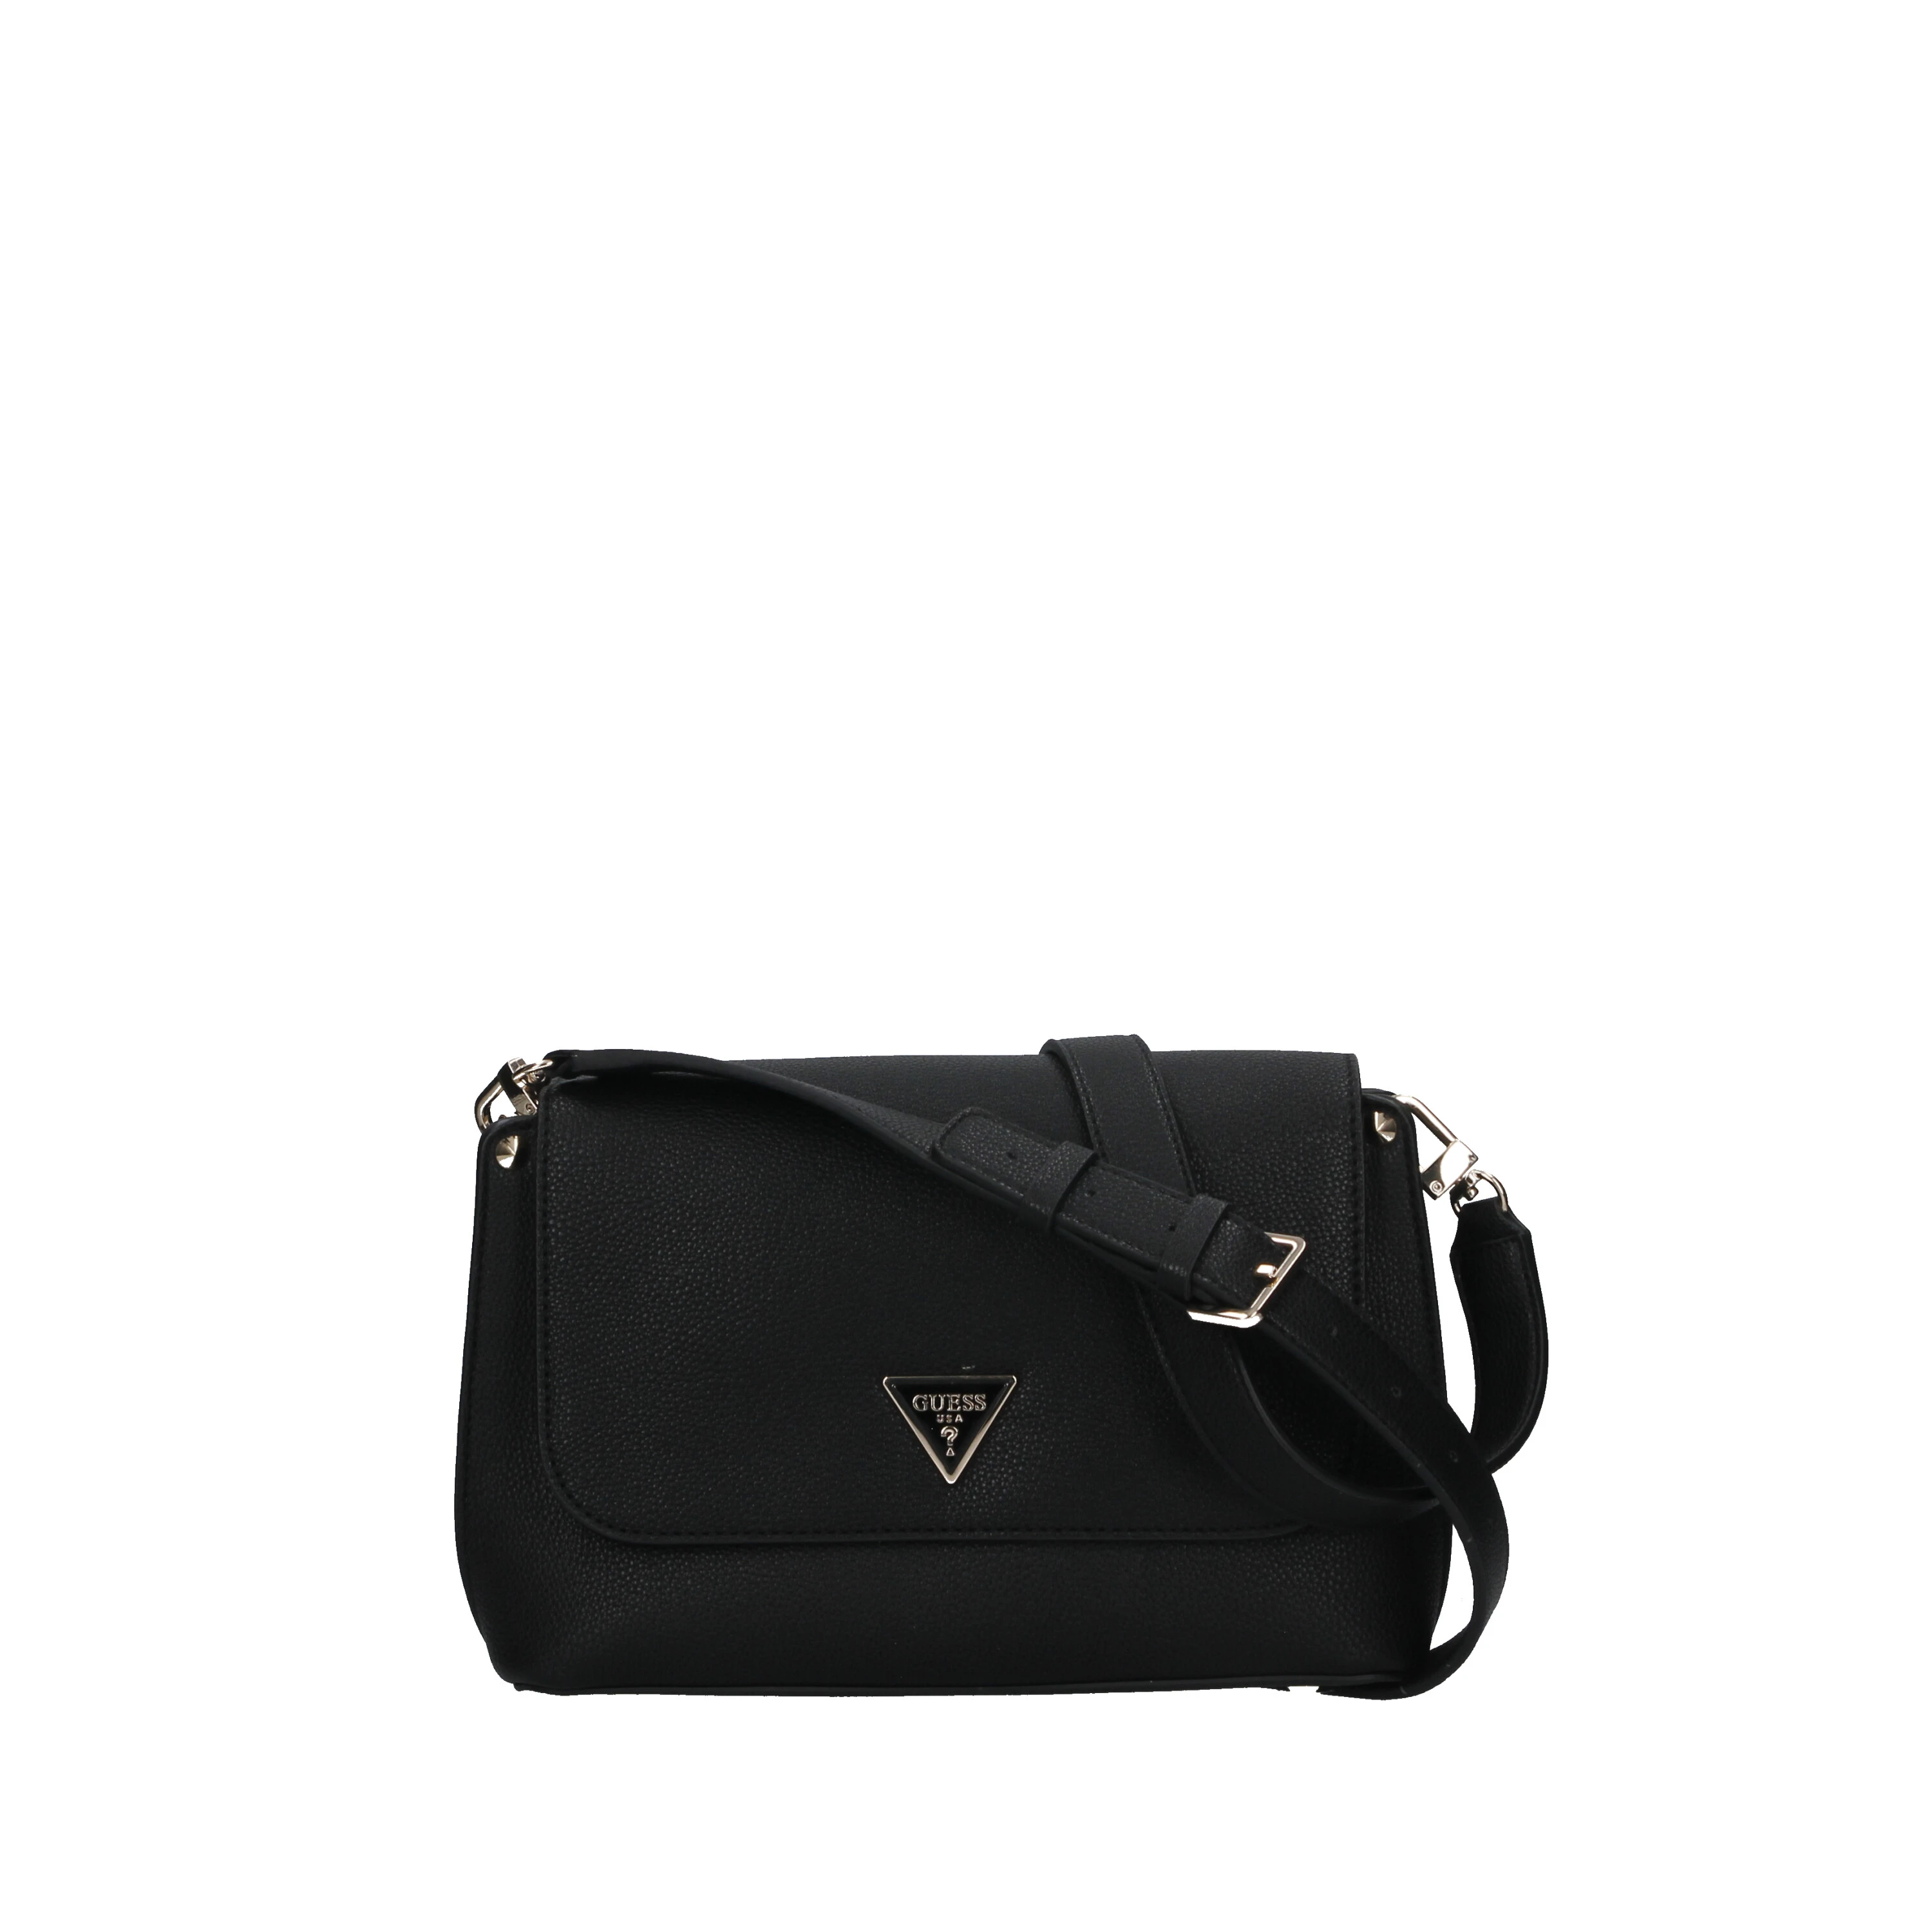 BORSA A TRACOLLA MERIDIAN FLAP IN ECOPELLE DONNA NERO